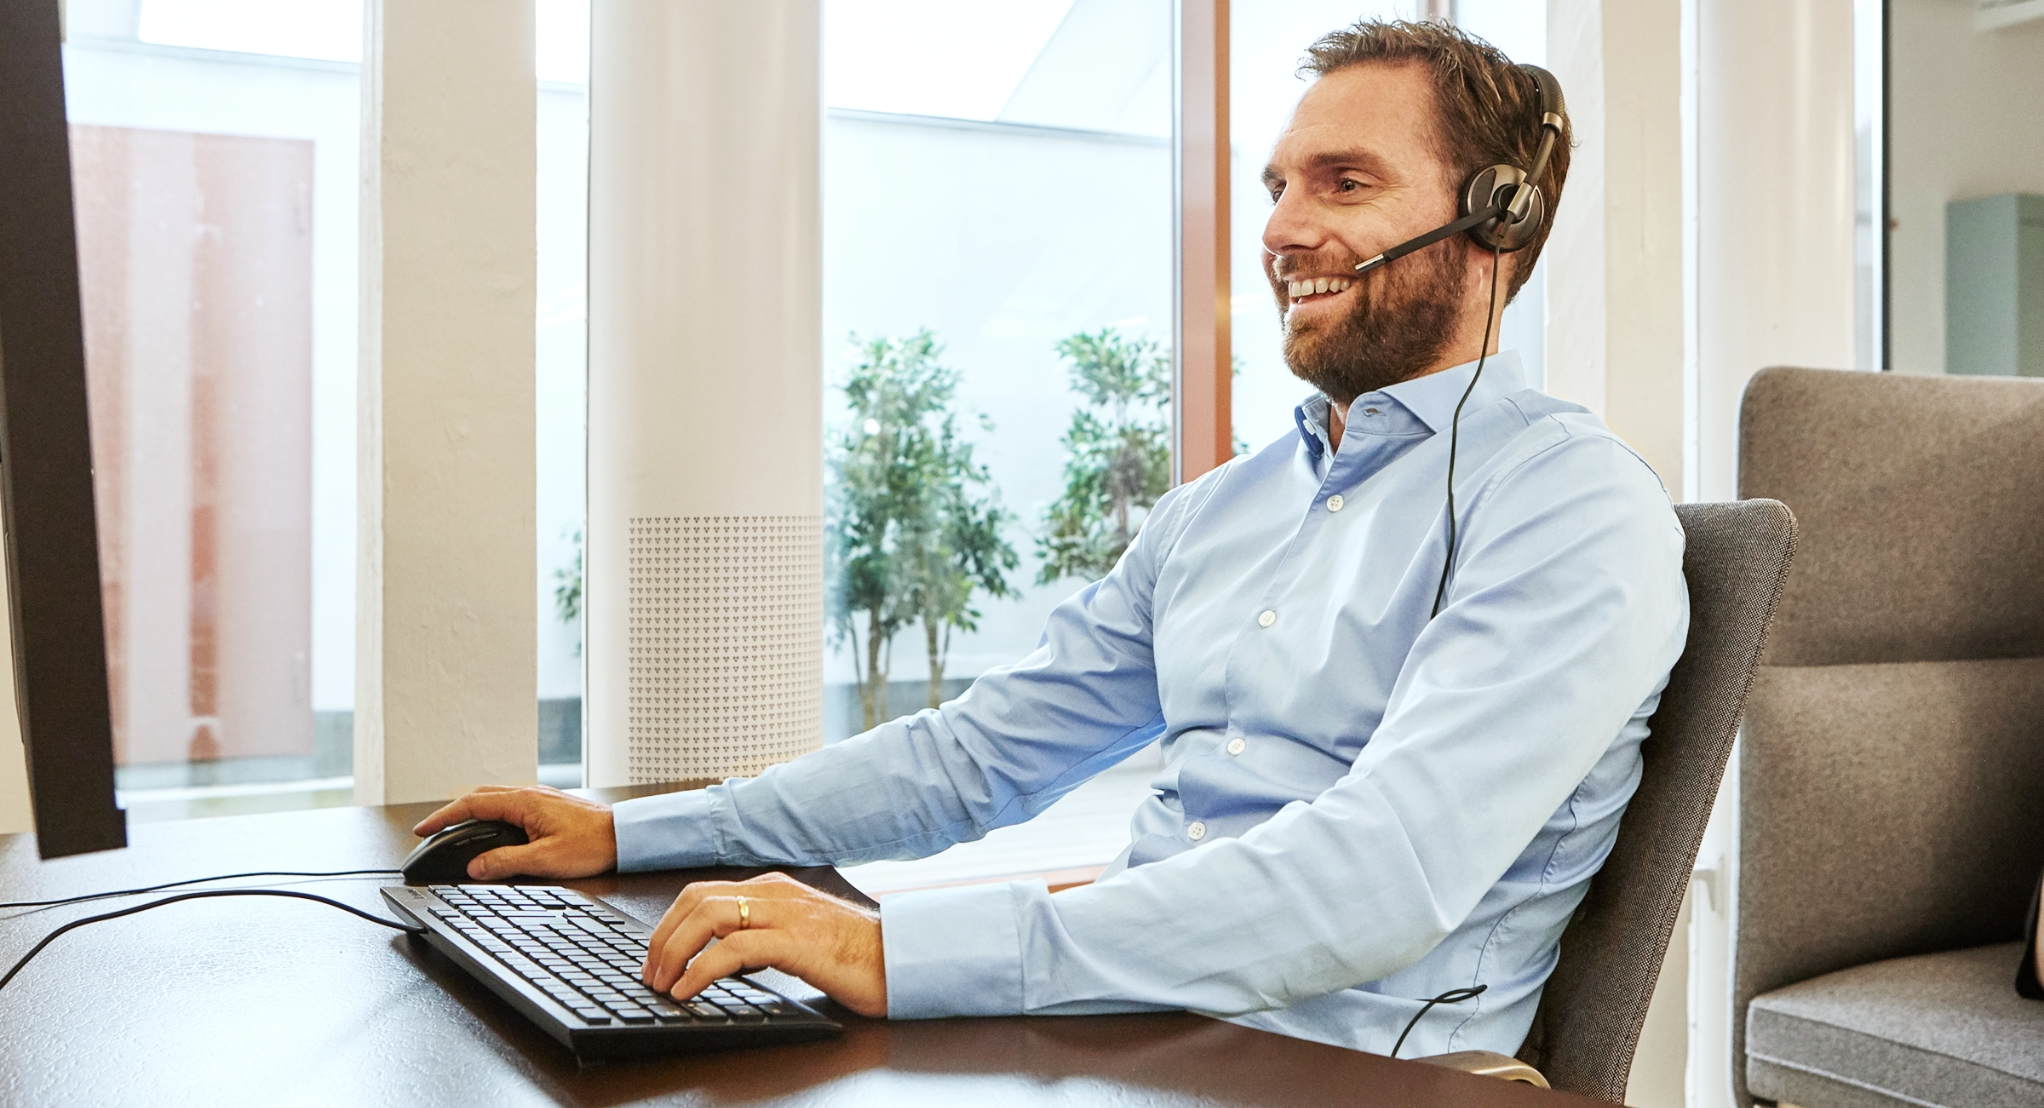 Man sitting with headset in front of computer